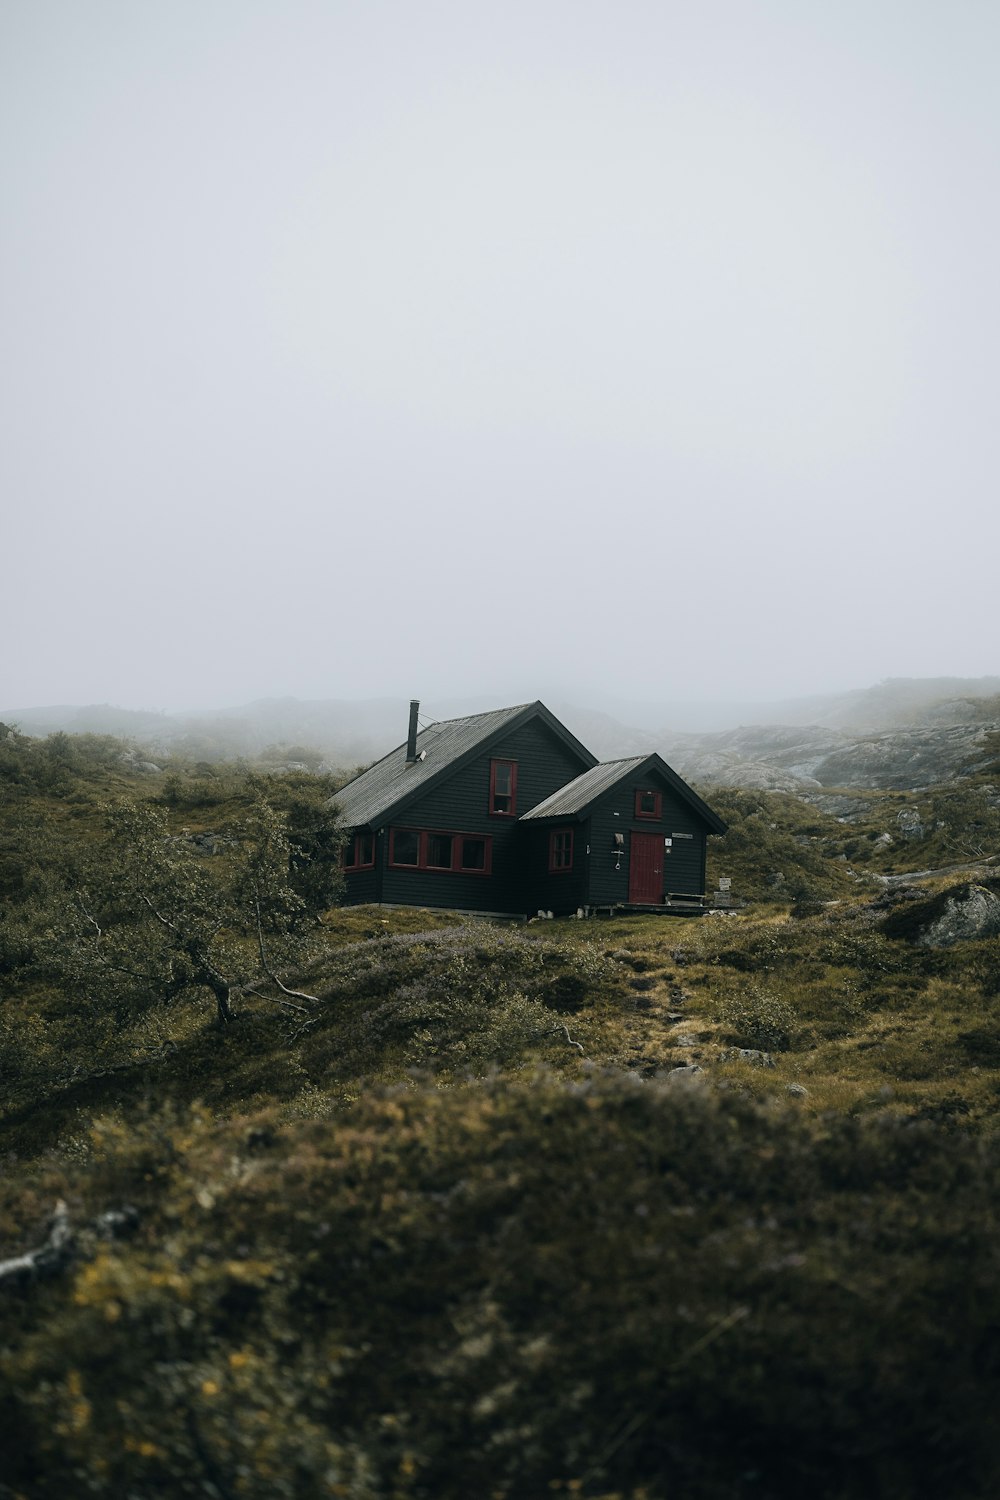 a house on a hill in the middle of a foggy day